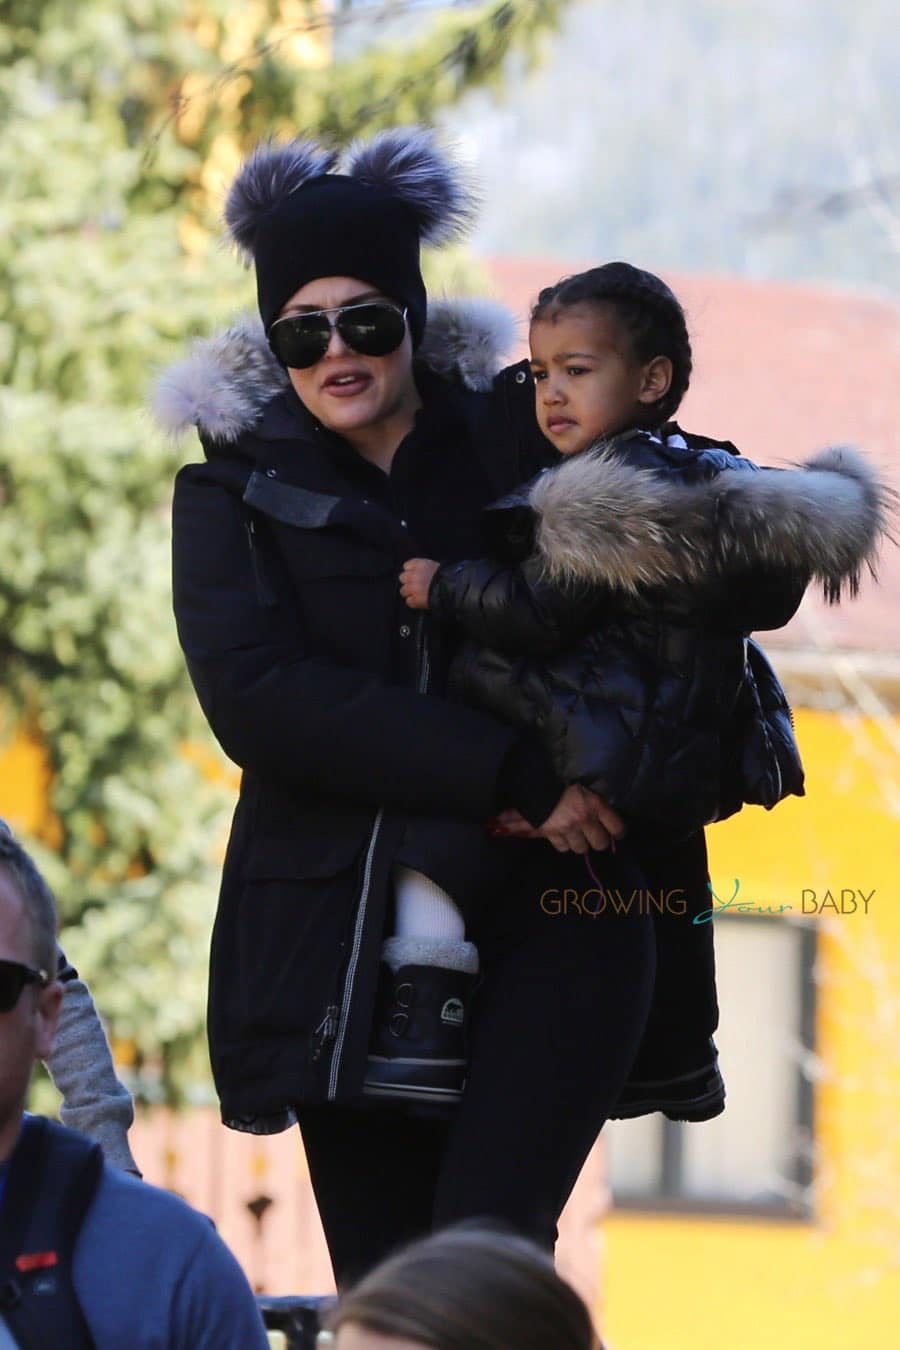 Khloe Kardashian in Vali Colorado with niece North West - Growing Your Baby